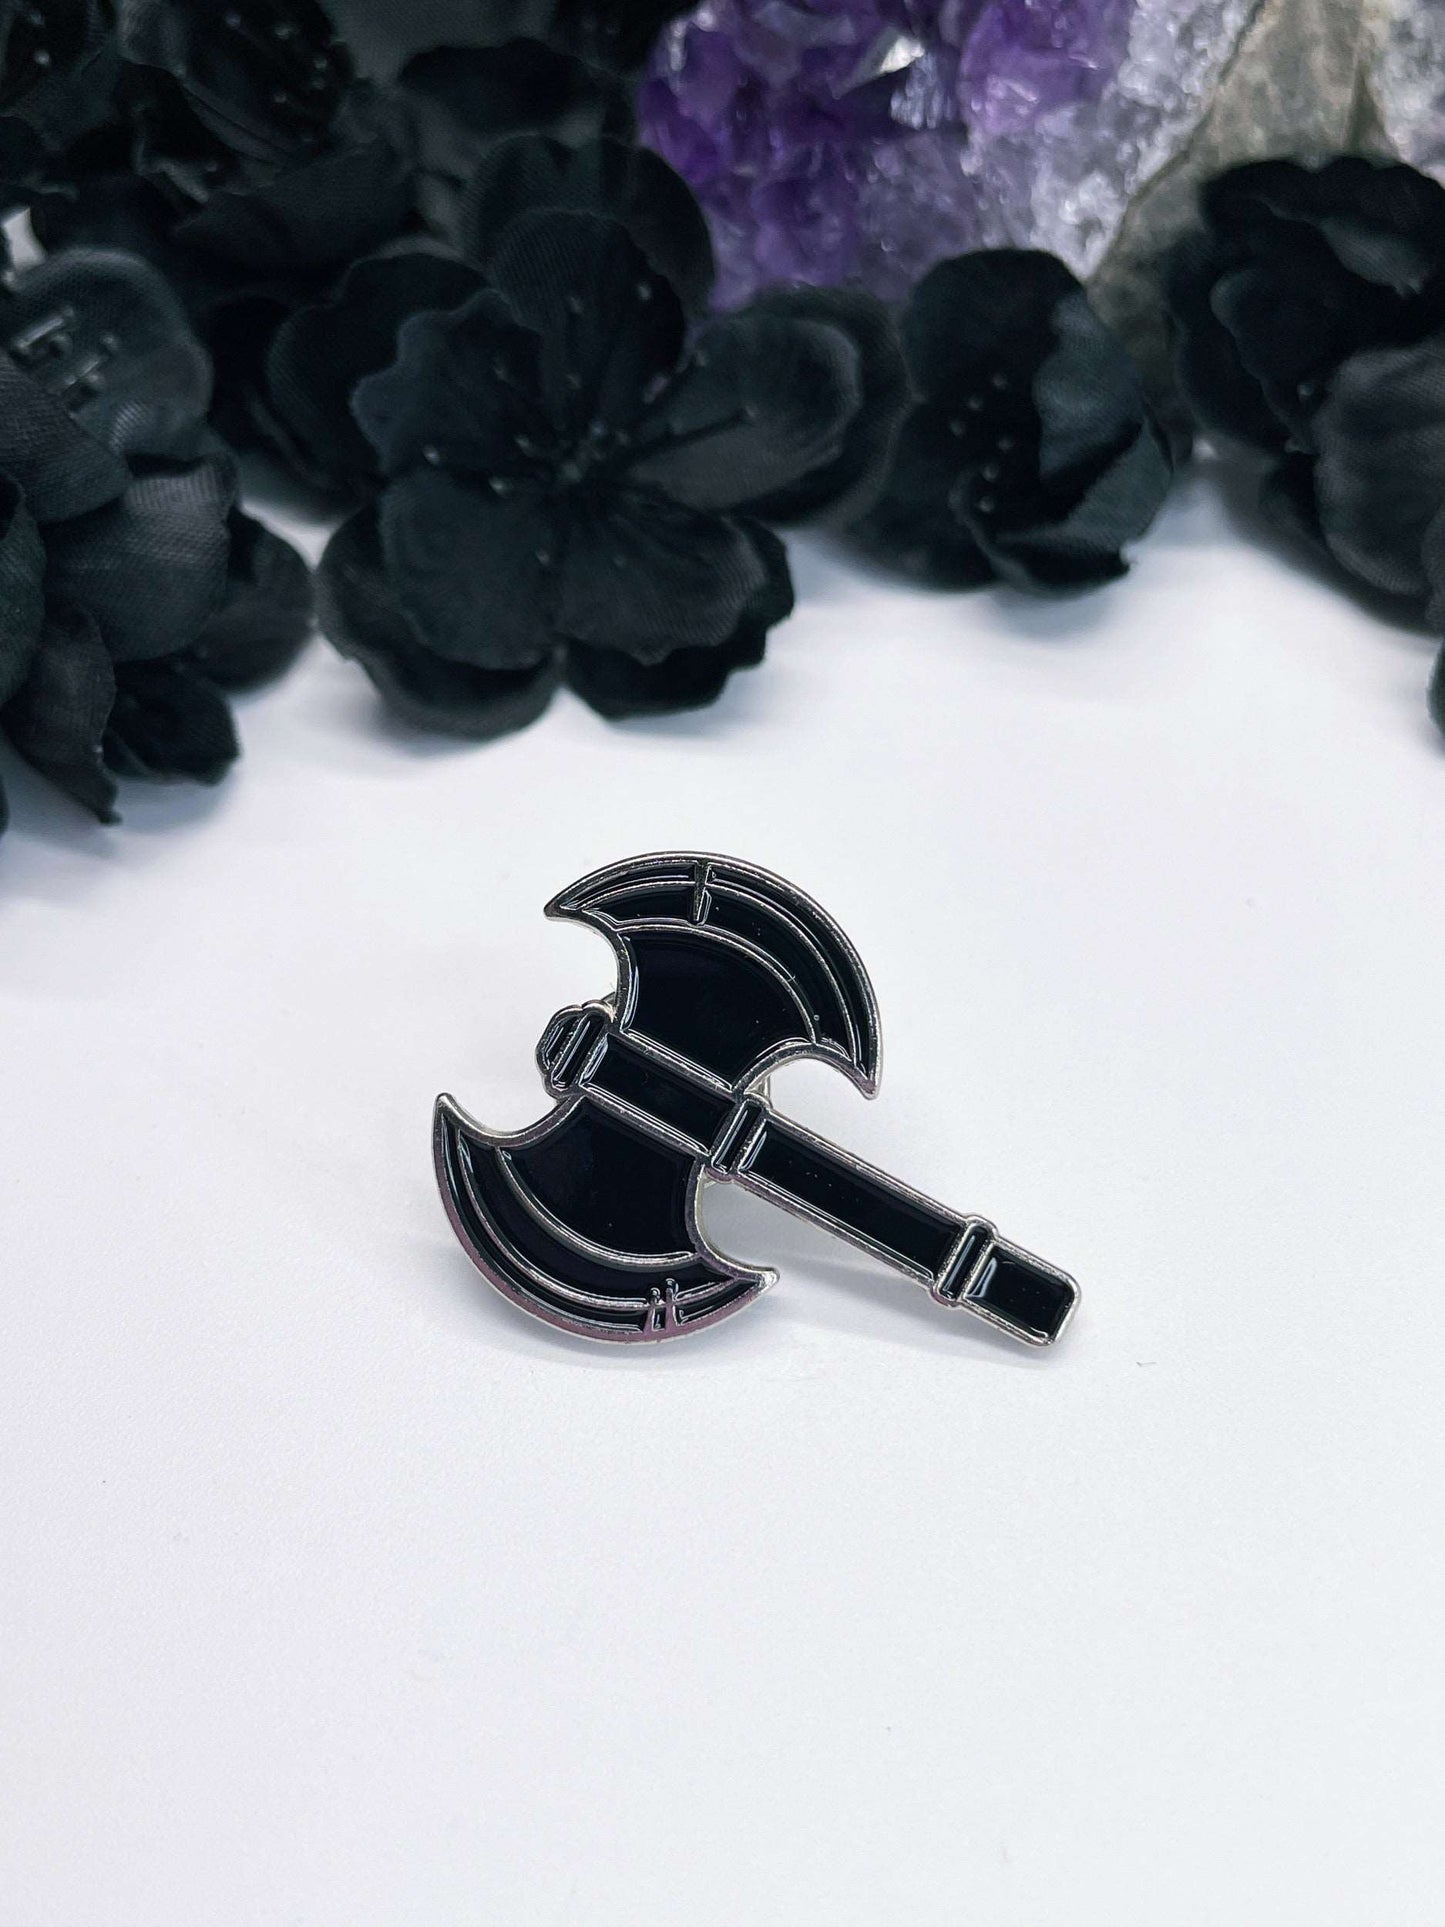 Pictured is a black enamel pin shaped like a double-sided axe.